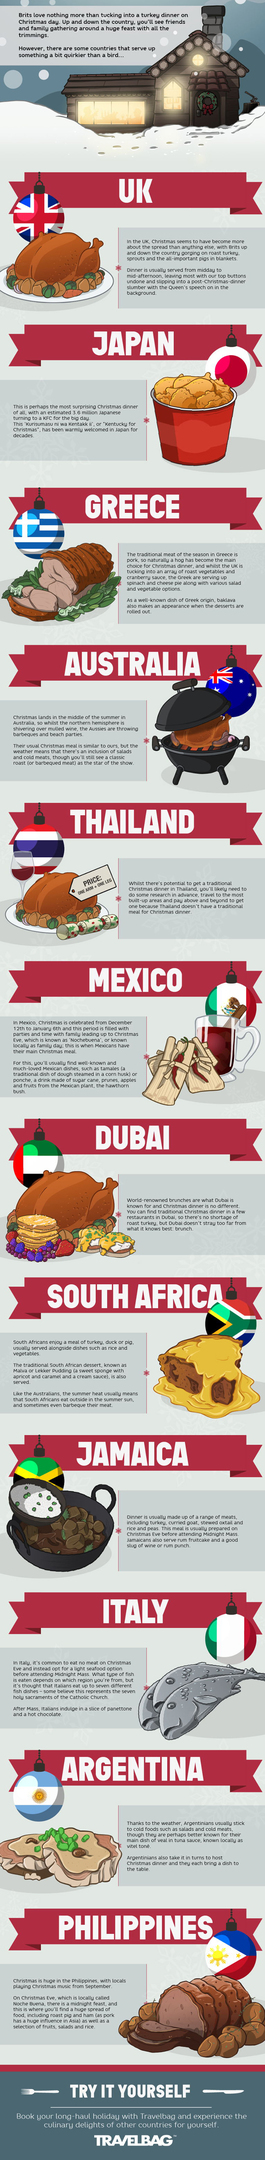 Food from around the world